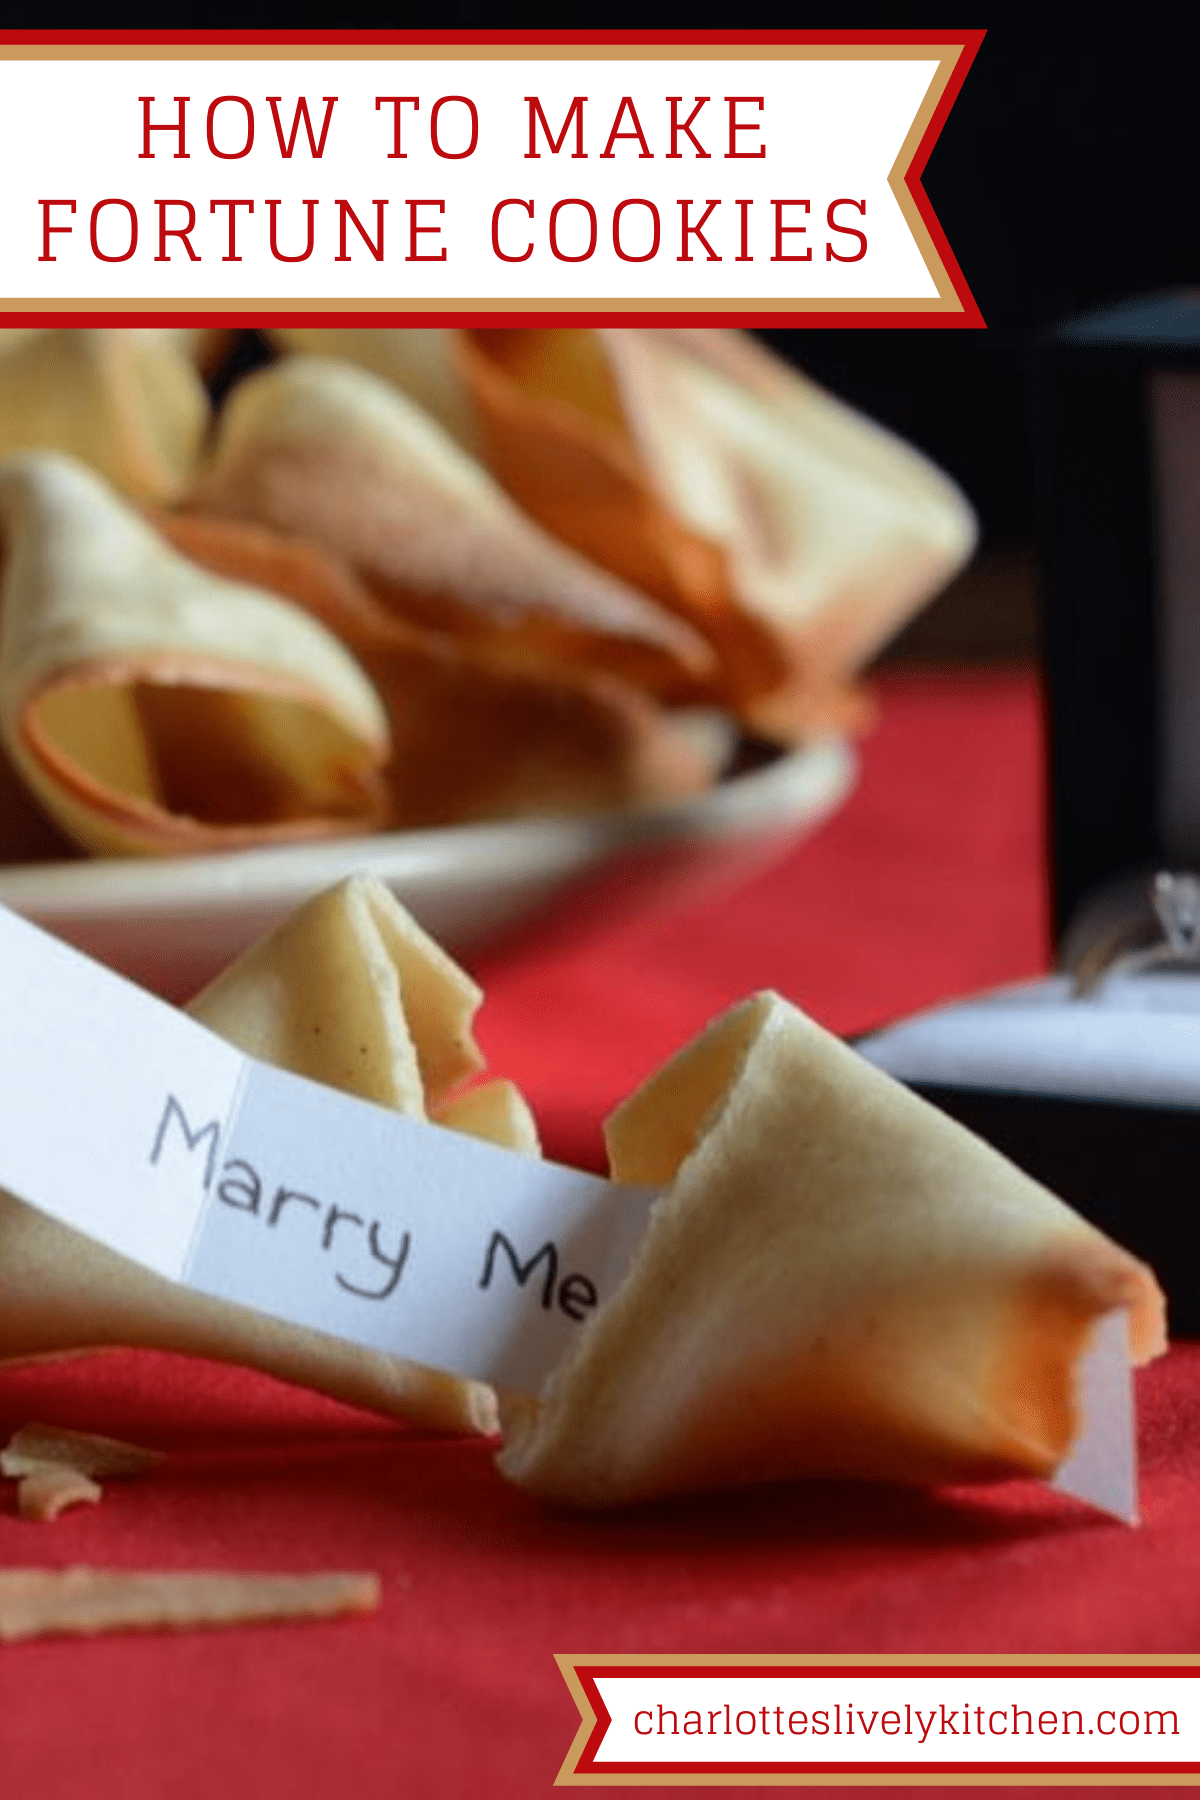 Pin graphic image showing a fortune cookie with a message saying marry me poking out. The page title is written at the top and the website name is shown at the bottom. 